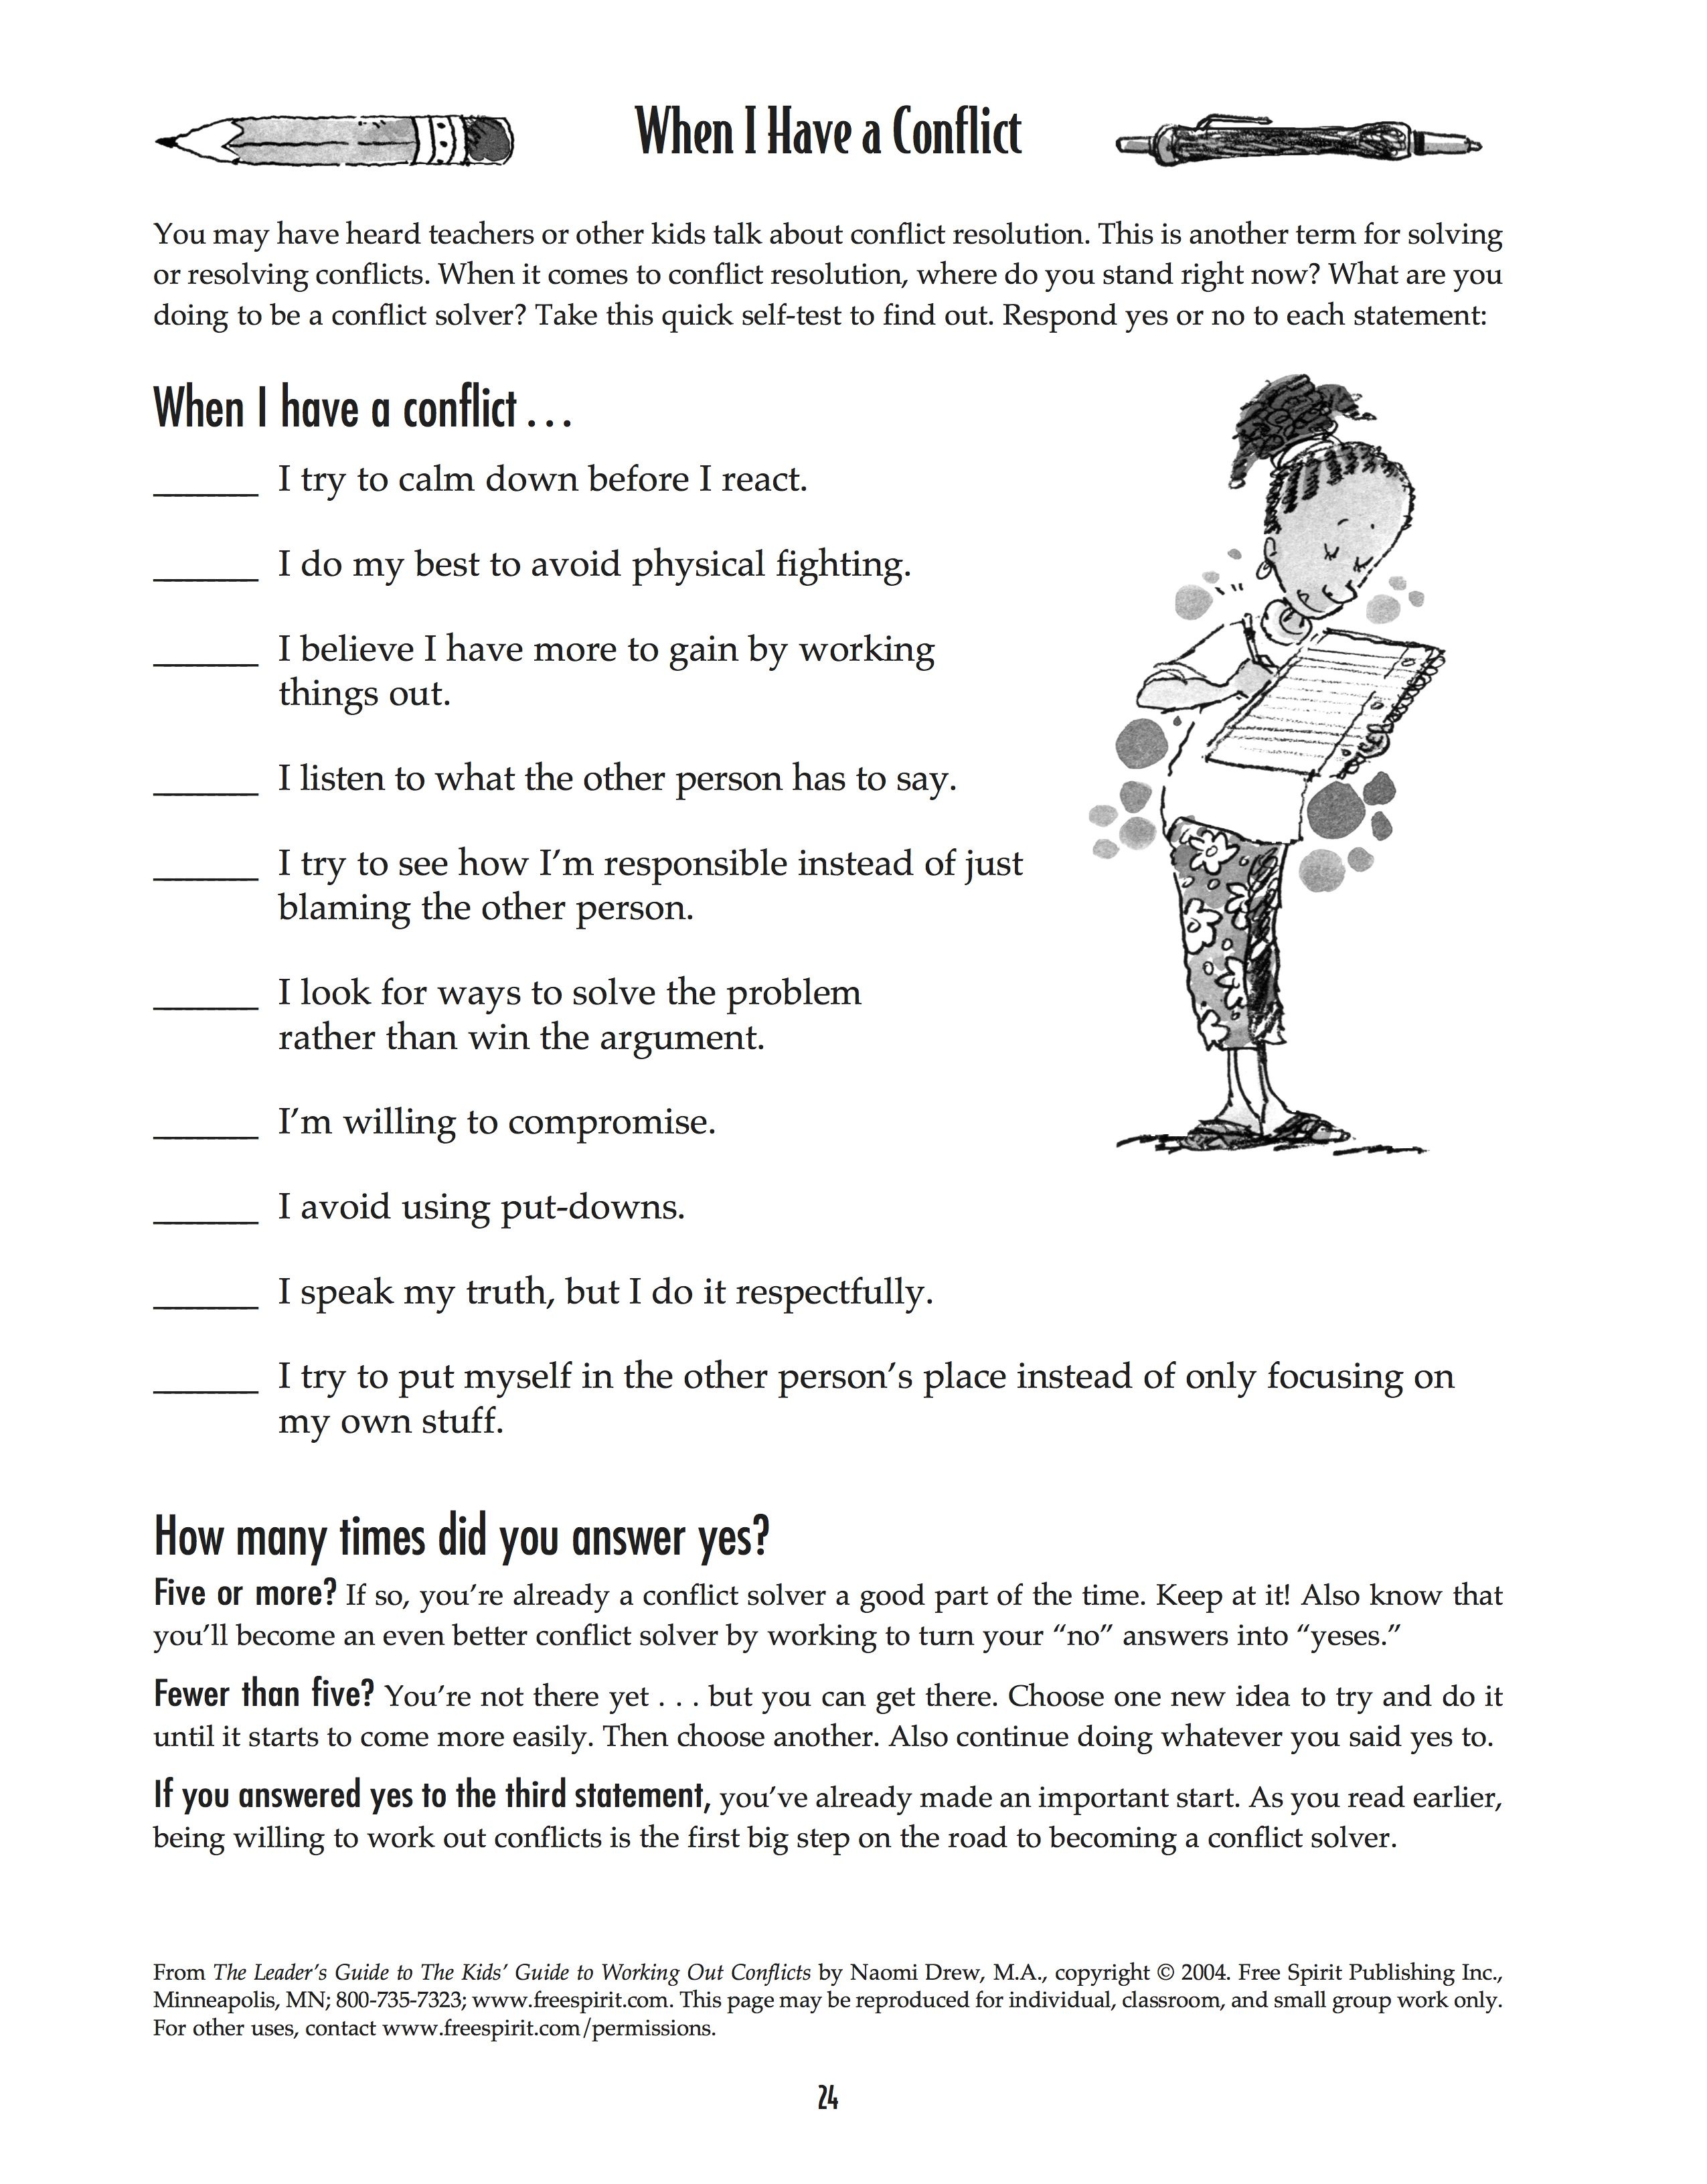 Free Printable Worksheet: When I Have A Conflict. A Quick Self-Test - Free Printable Coping Skills Worksheets